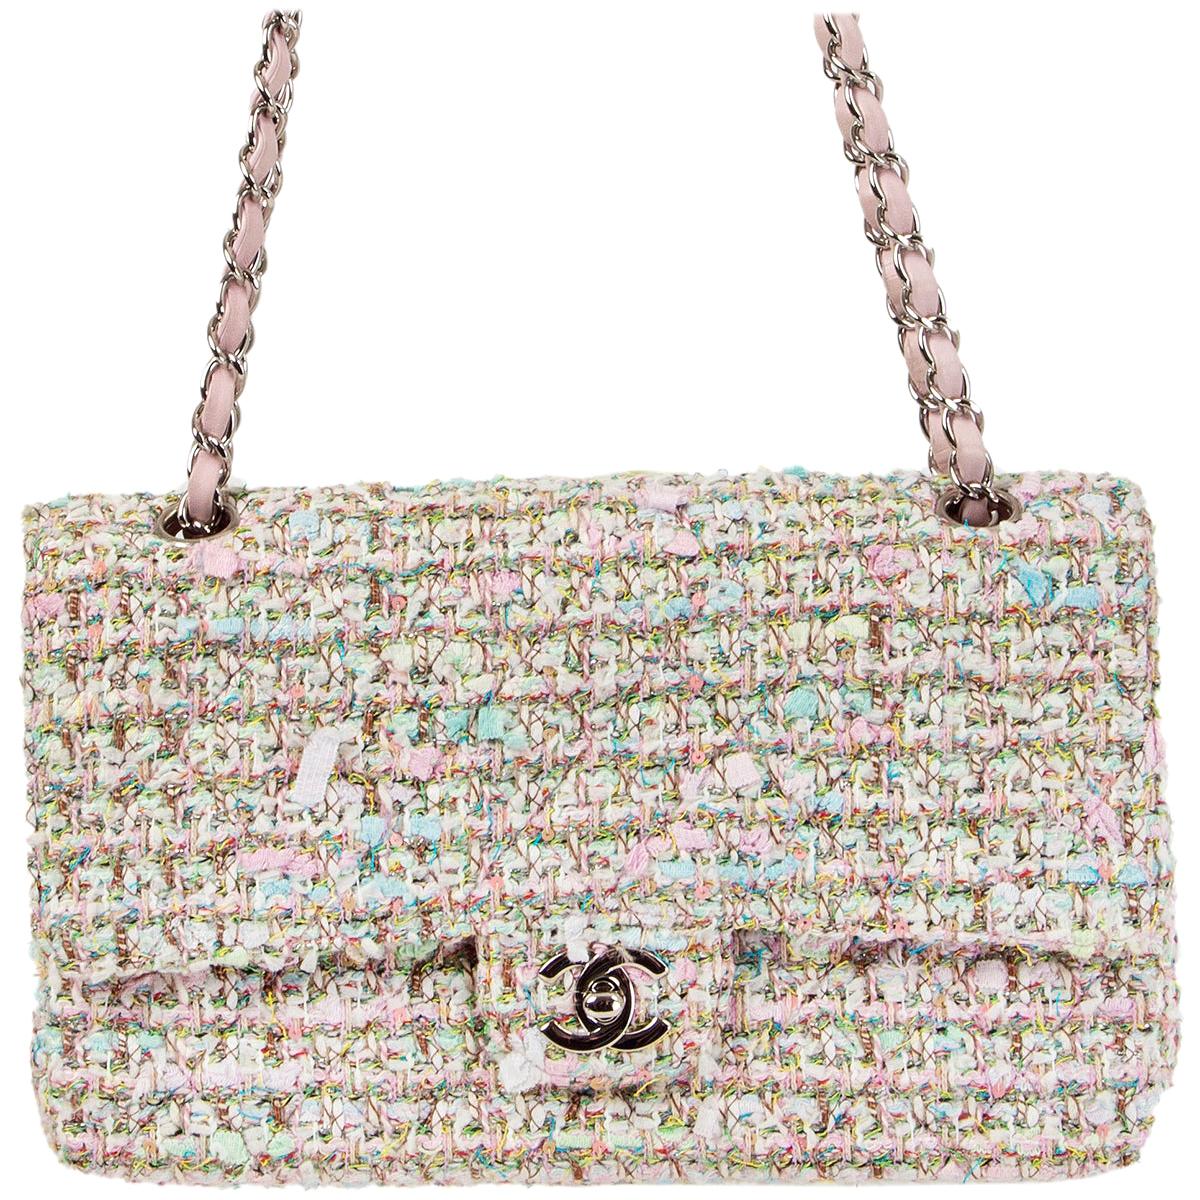 Timeless/classique tweed crossbody bag Chanel Multicolour in Tweed -  35072116